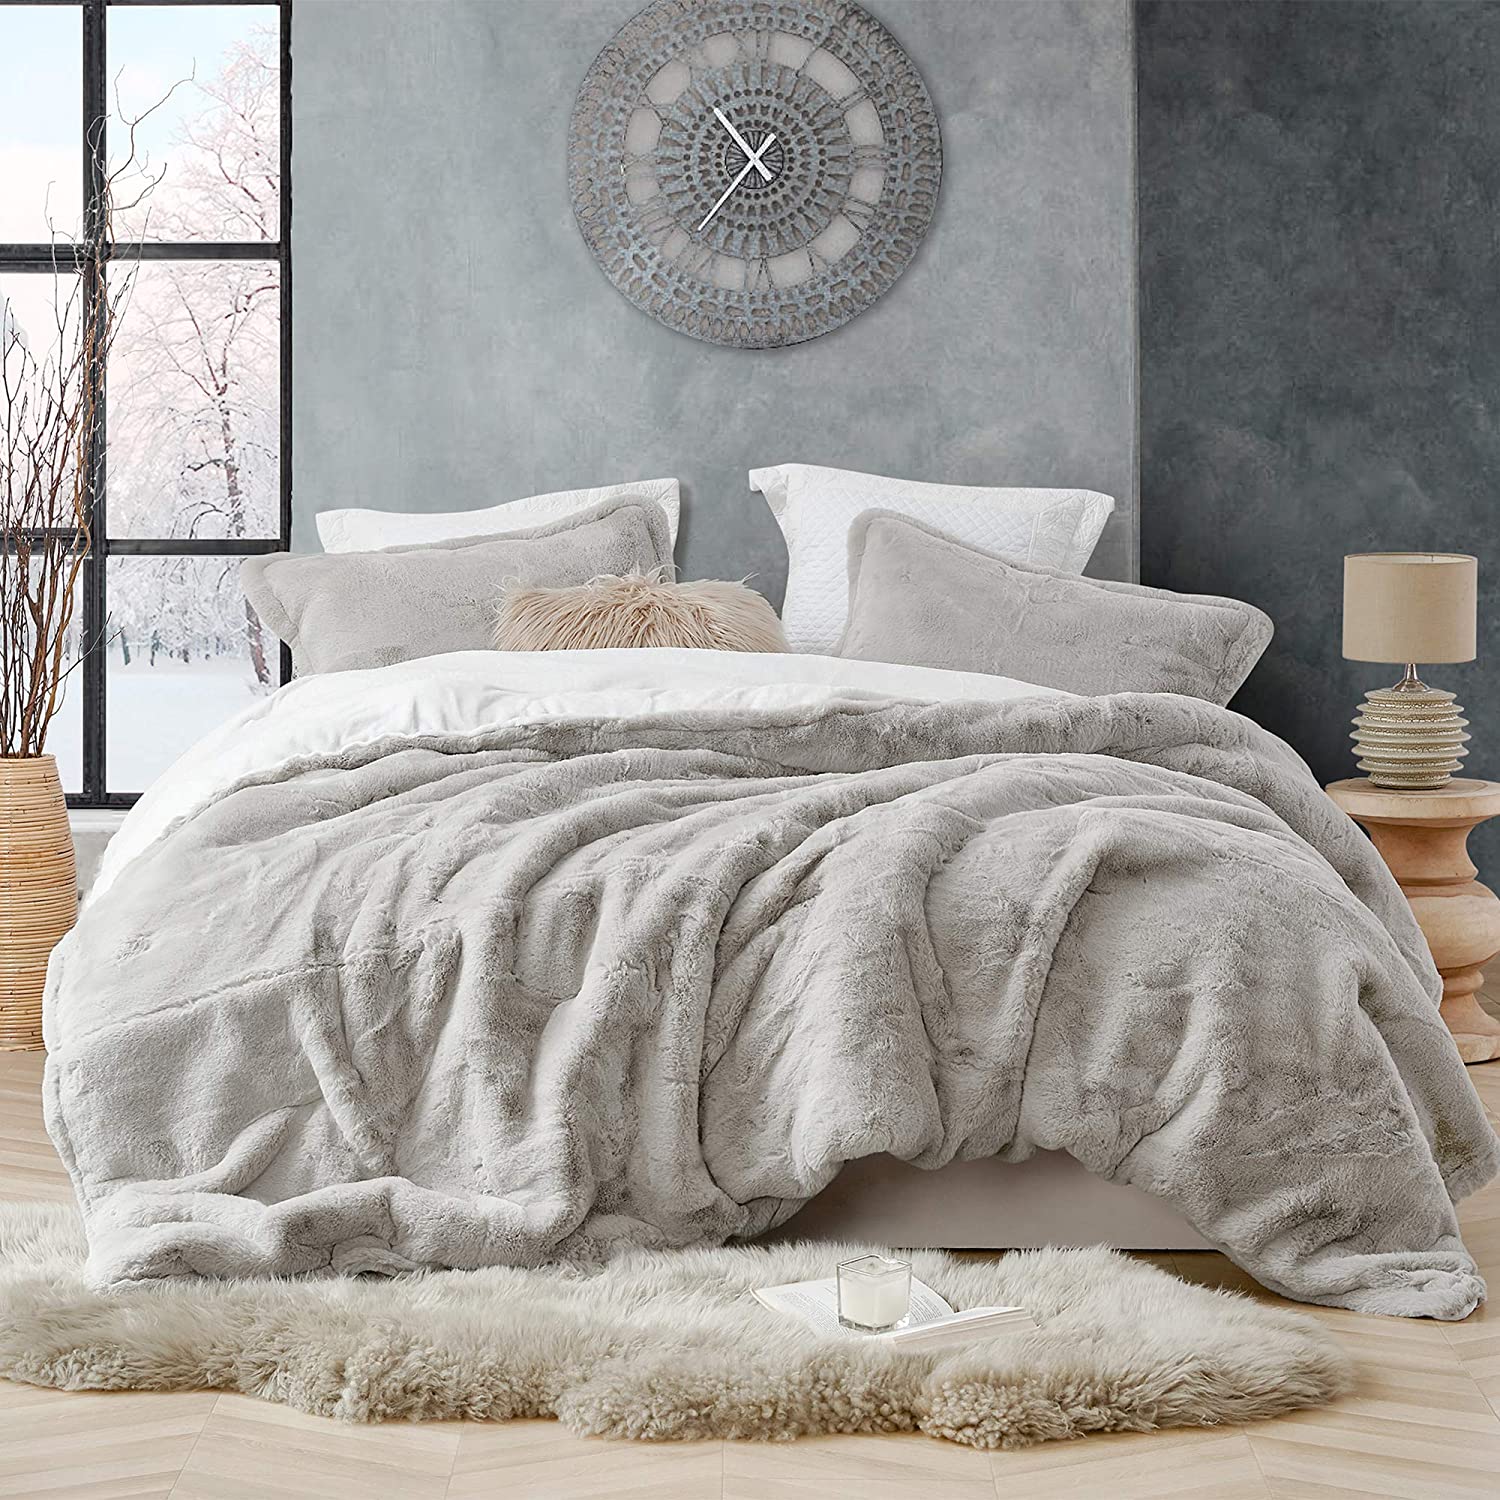 Byourbed Coma Inducer Comforter - Charcoal - King